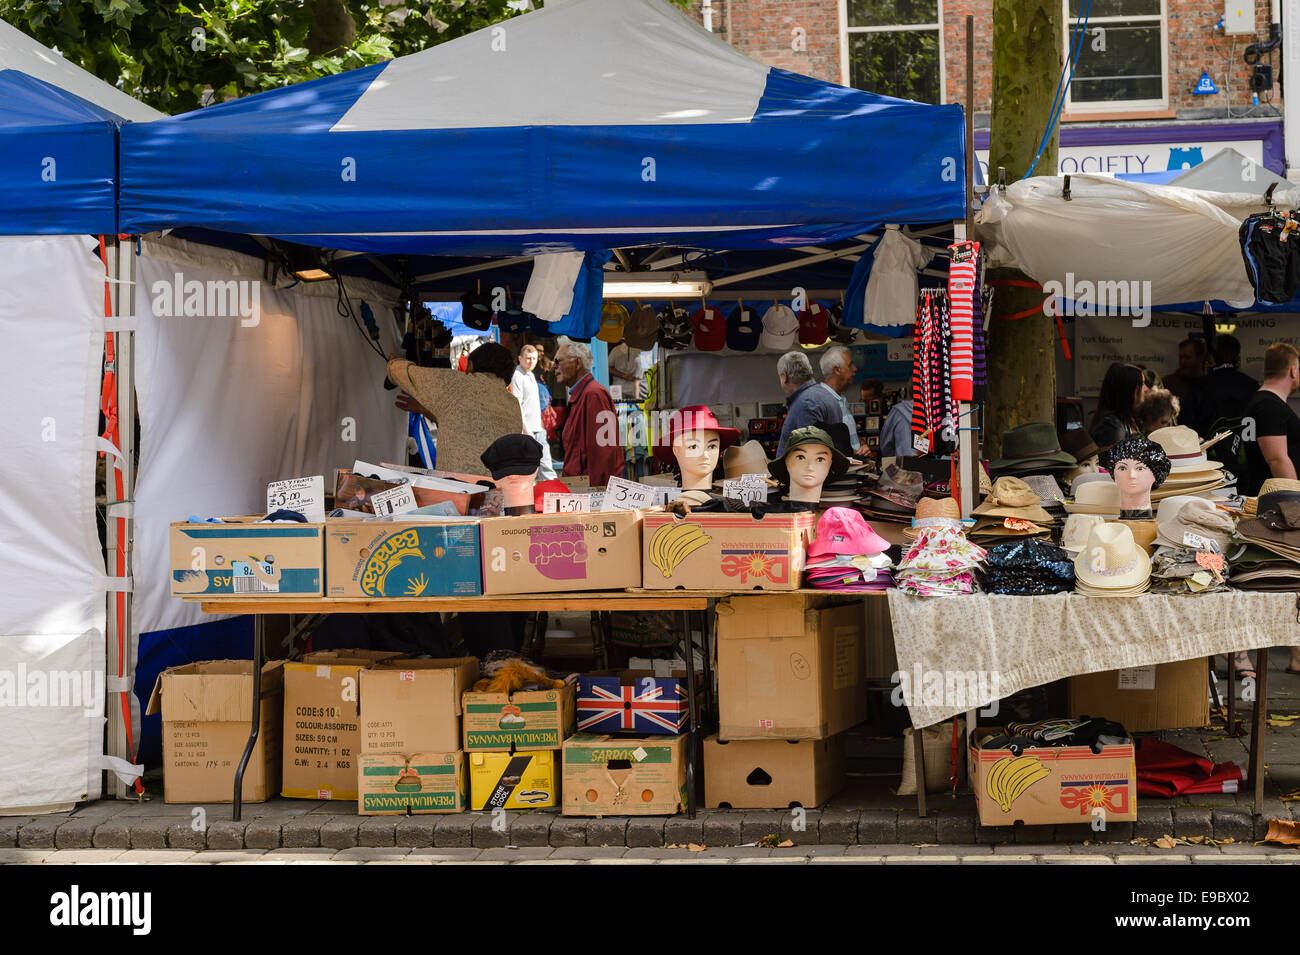 A market stall selling hats in central York, UK. Mannekin mannequin heads are used to display the hats. Stock Photo